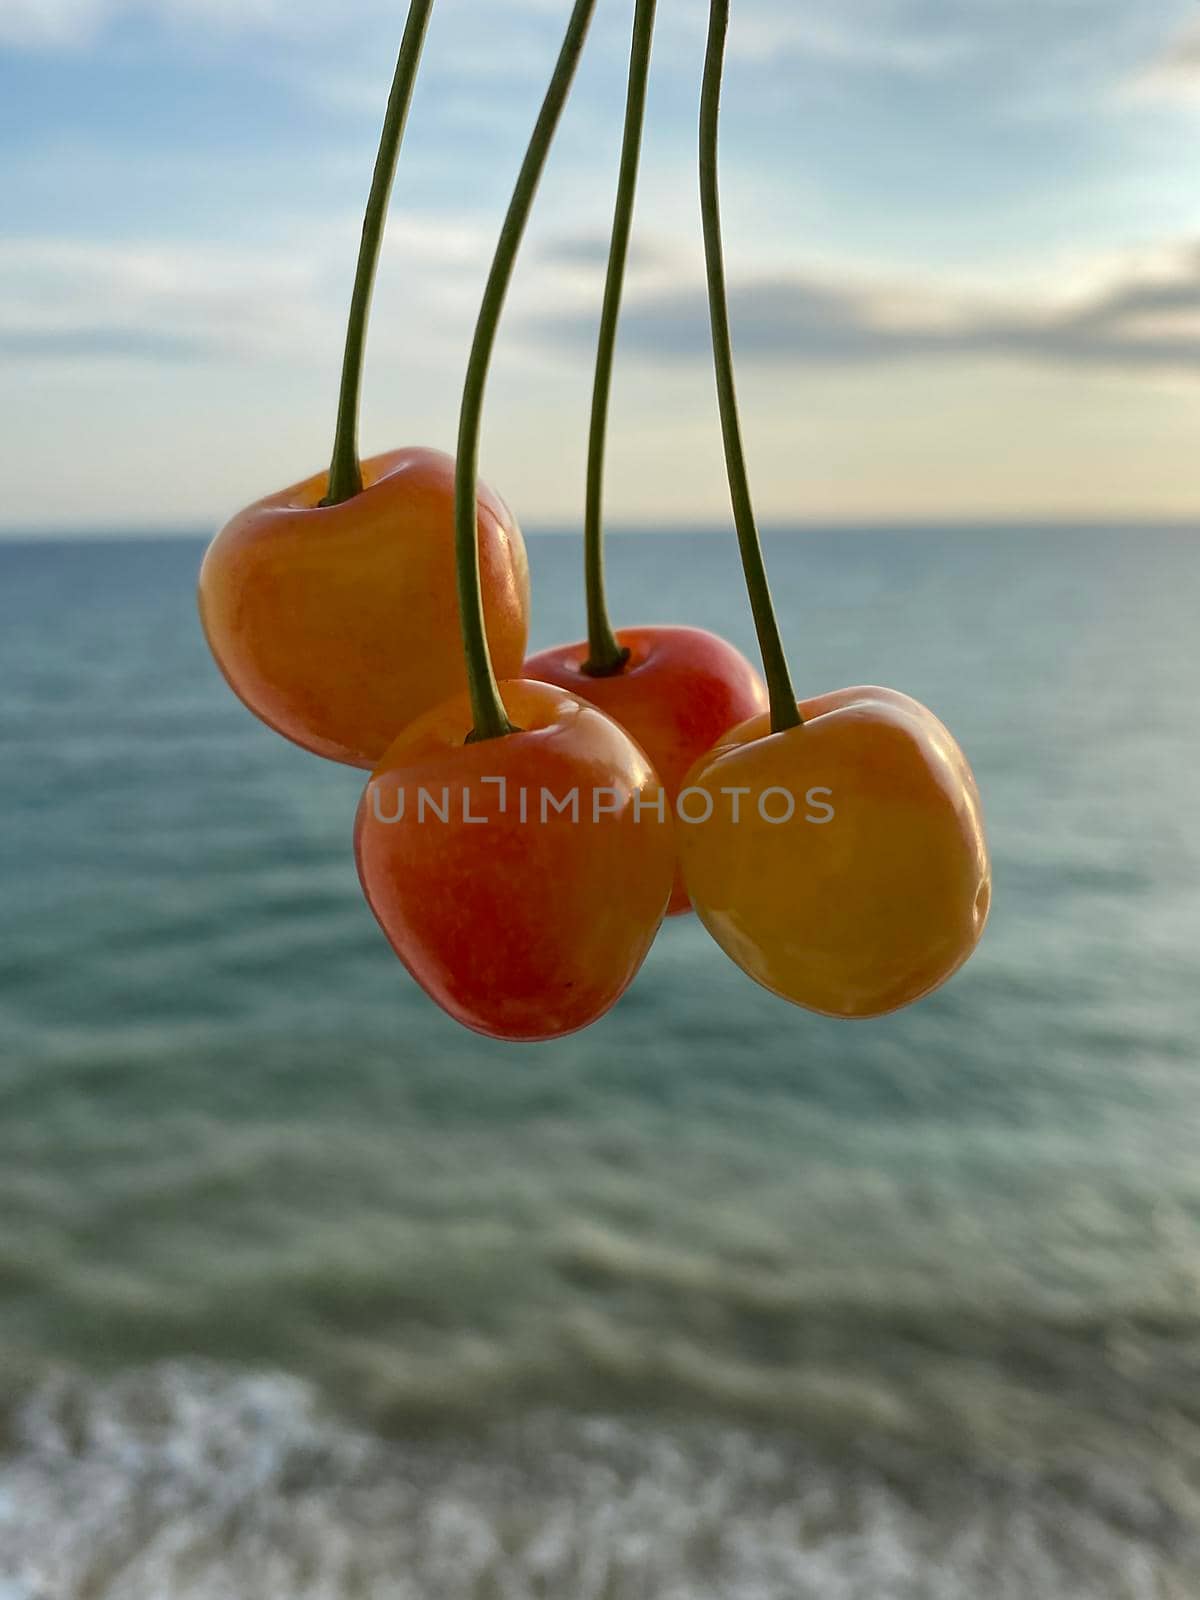 yellow cherry fruits on the background of the seascape